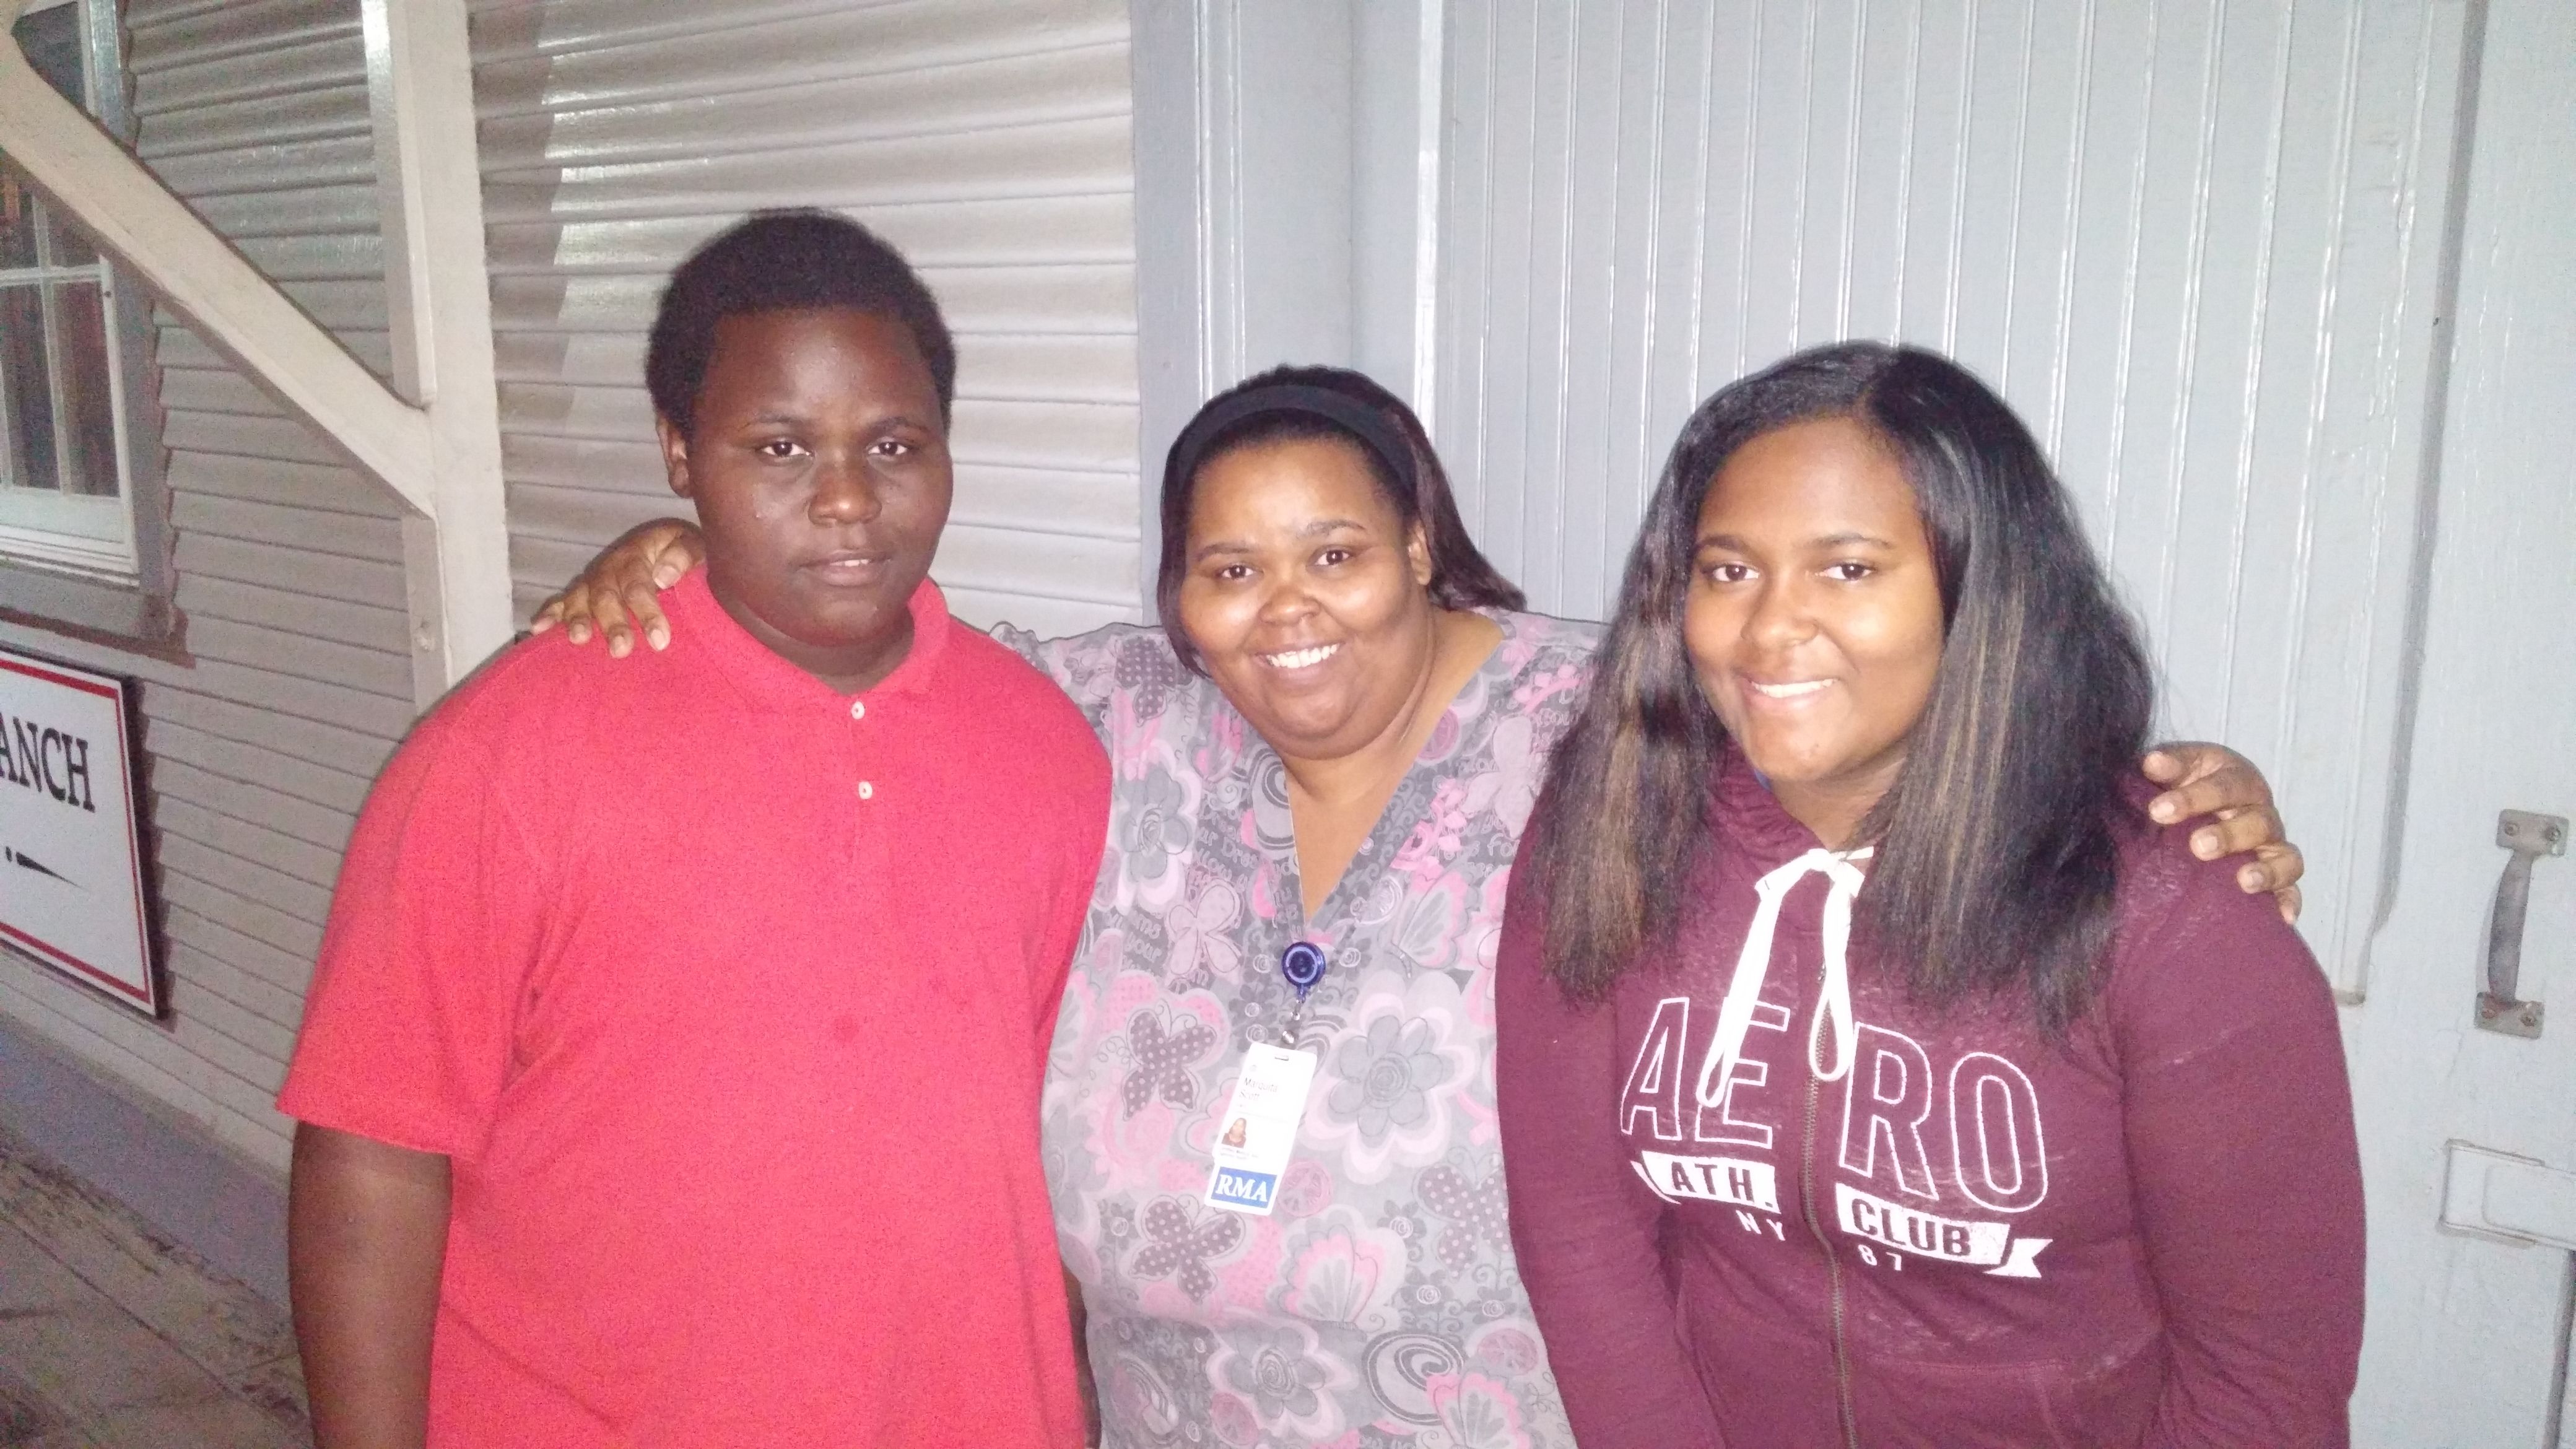 Marquita and her family